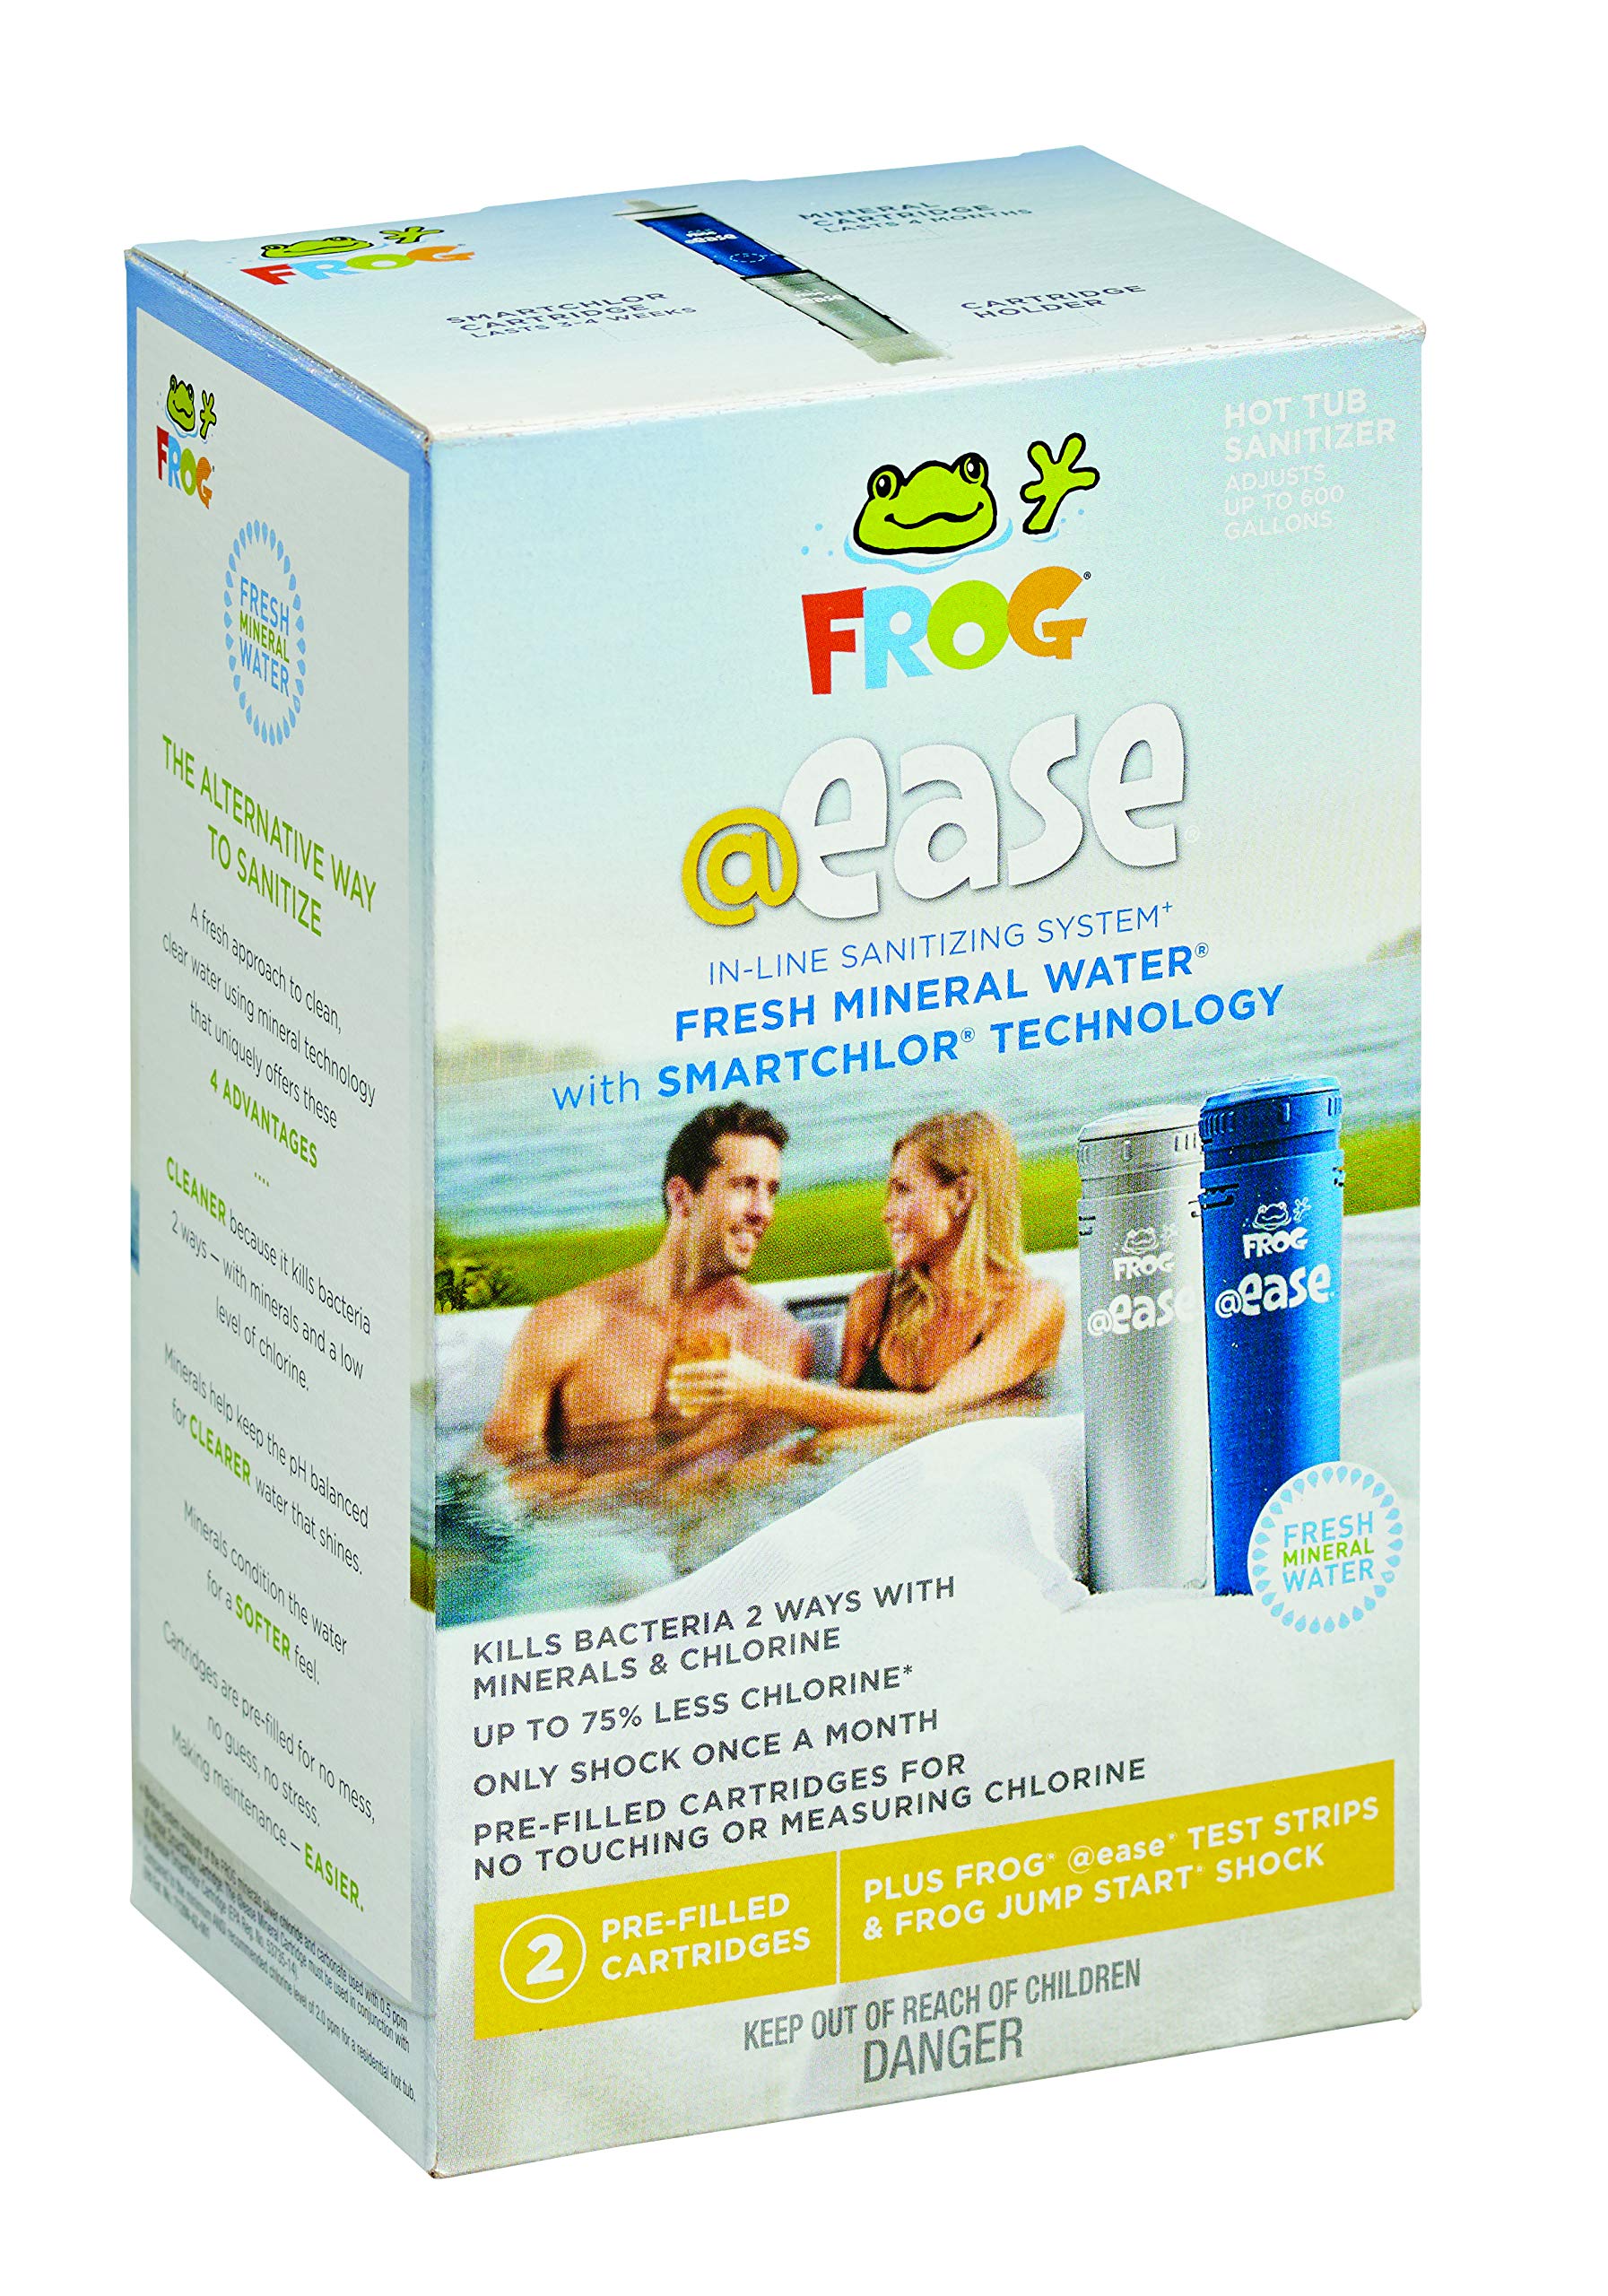 FROG @Ease in-Line Sanitizing System for Hot Tubs, for use in Marquis Spas, Caldera Spas, Artesian Spas and Hot Springs Spas up to 600 gallons, Hot Tub Sanitizer, Cyanuric Acid Free